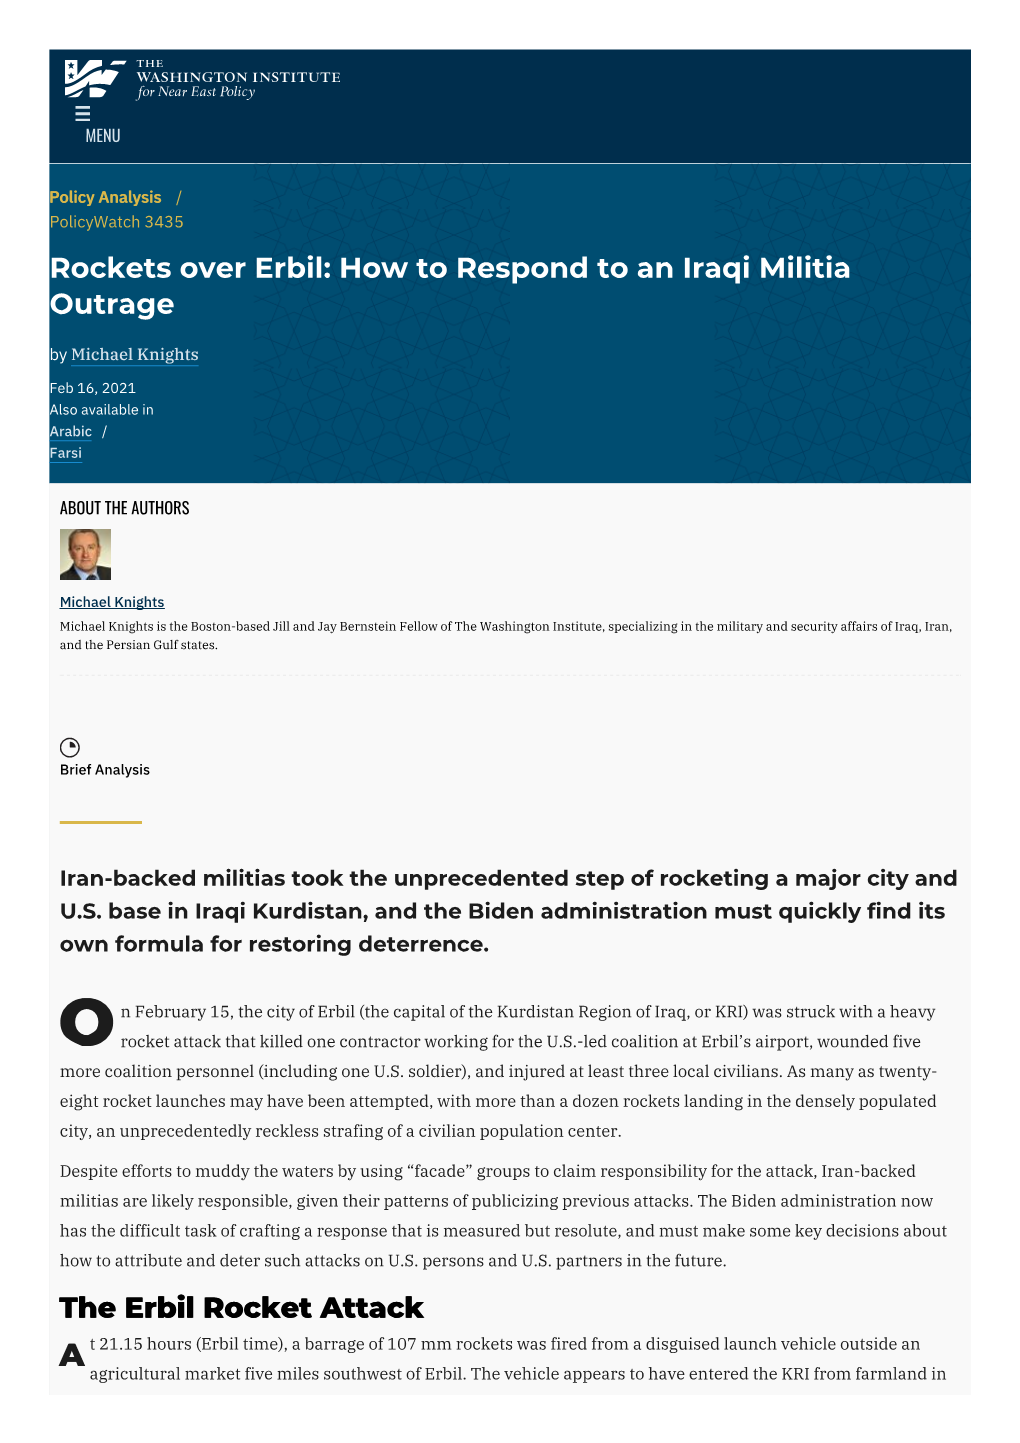 How to Respond to an Iraqi Militia Outrage by Michael Knights